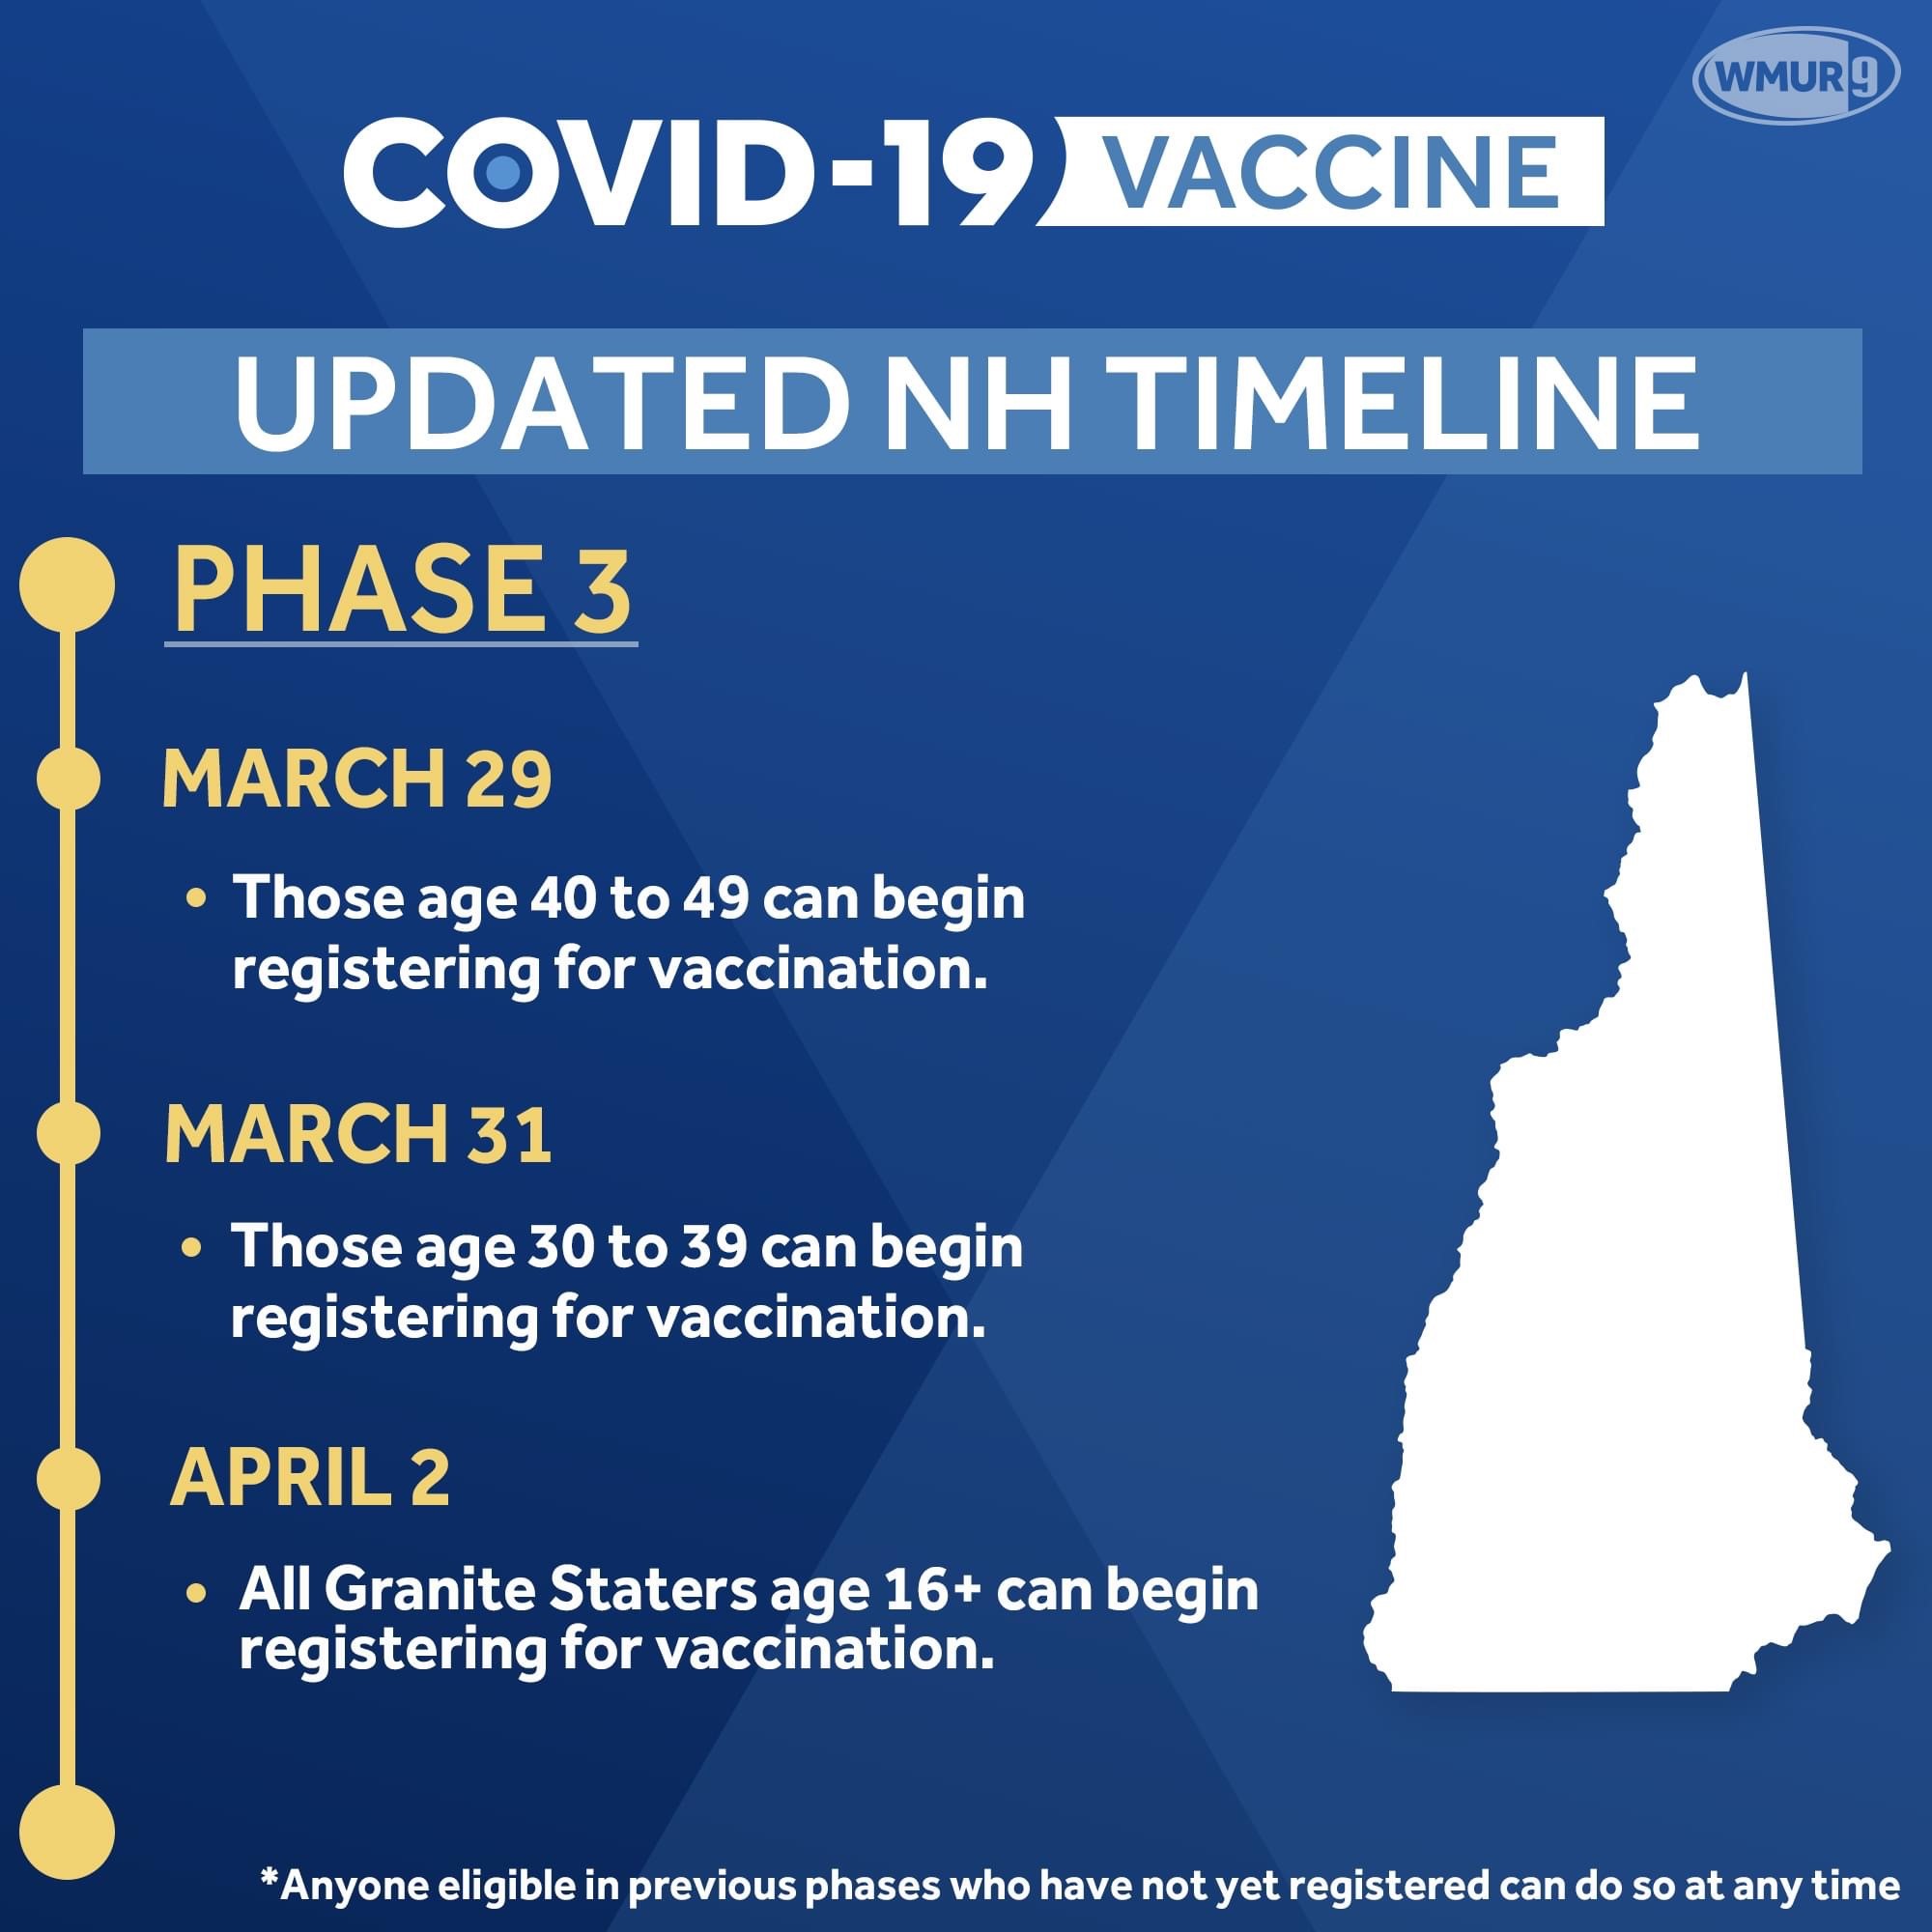 Vaccine Updated Timeline - Phase 3